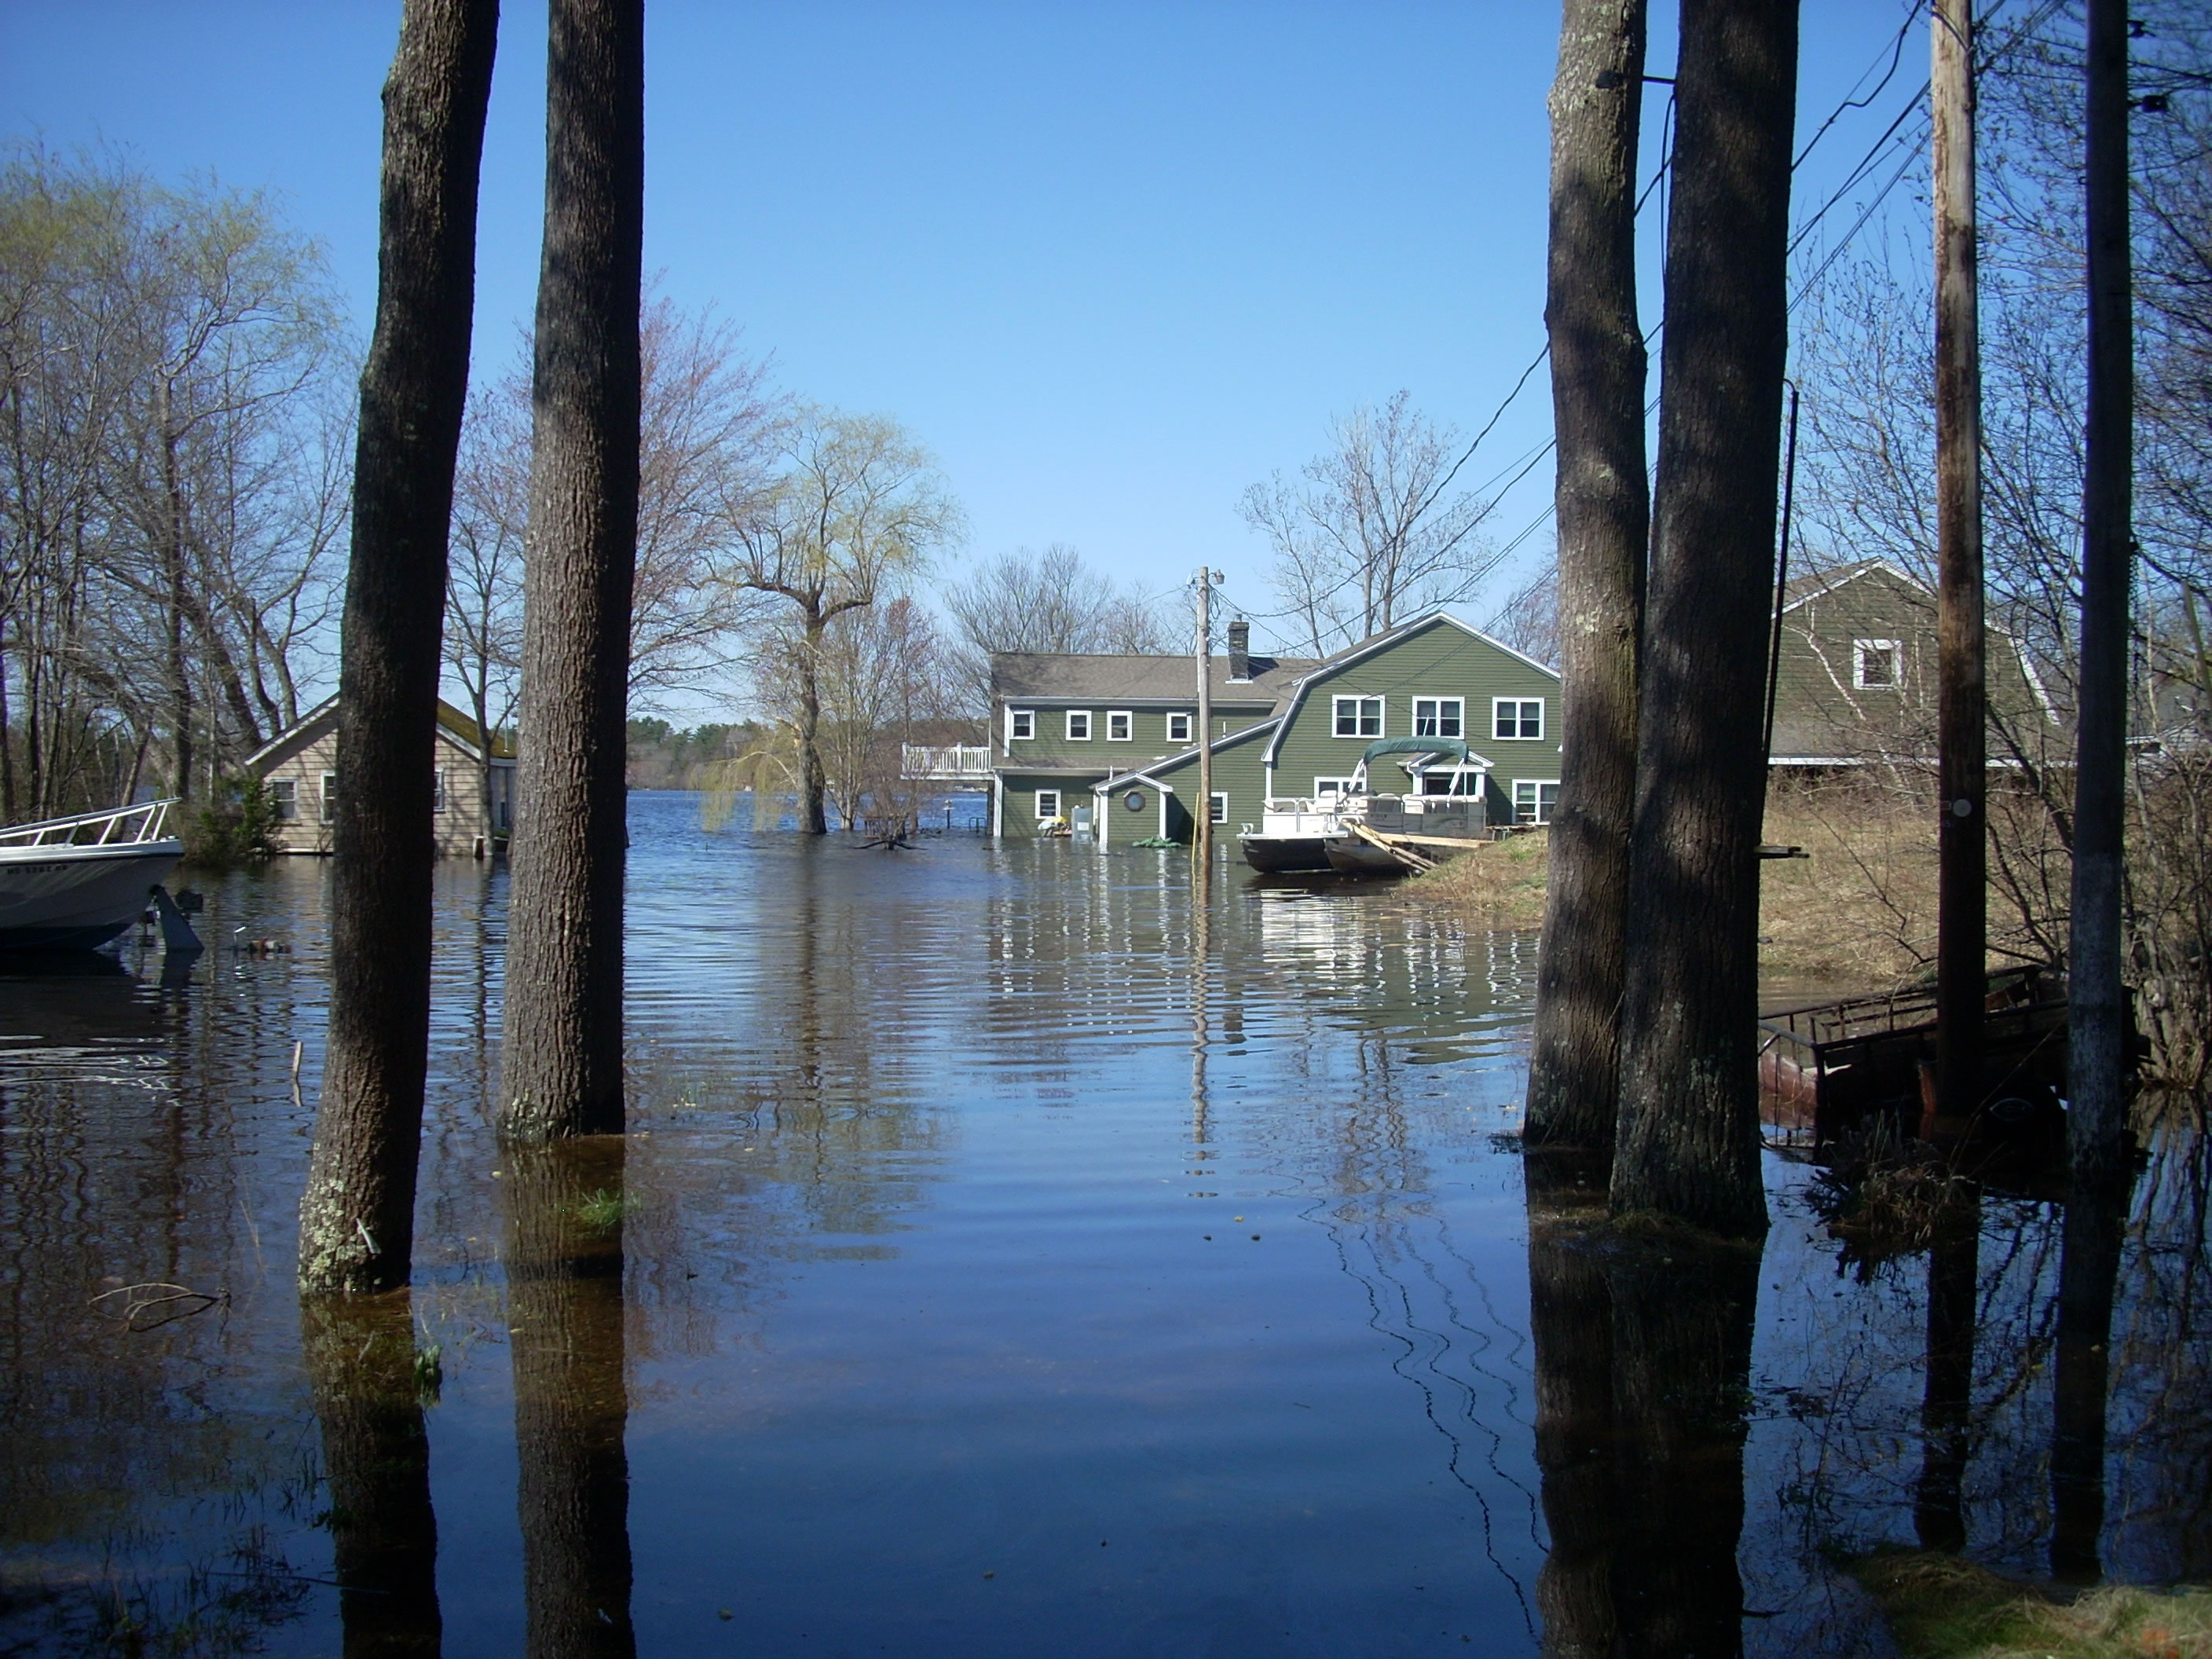 A photo of the Lakeville Flood near the Boatlanding